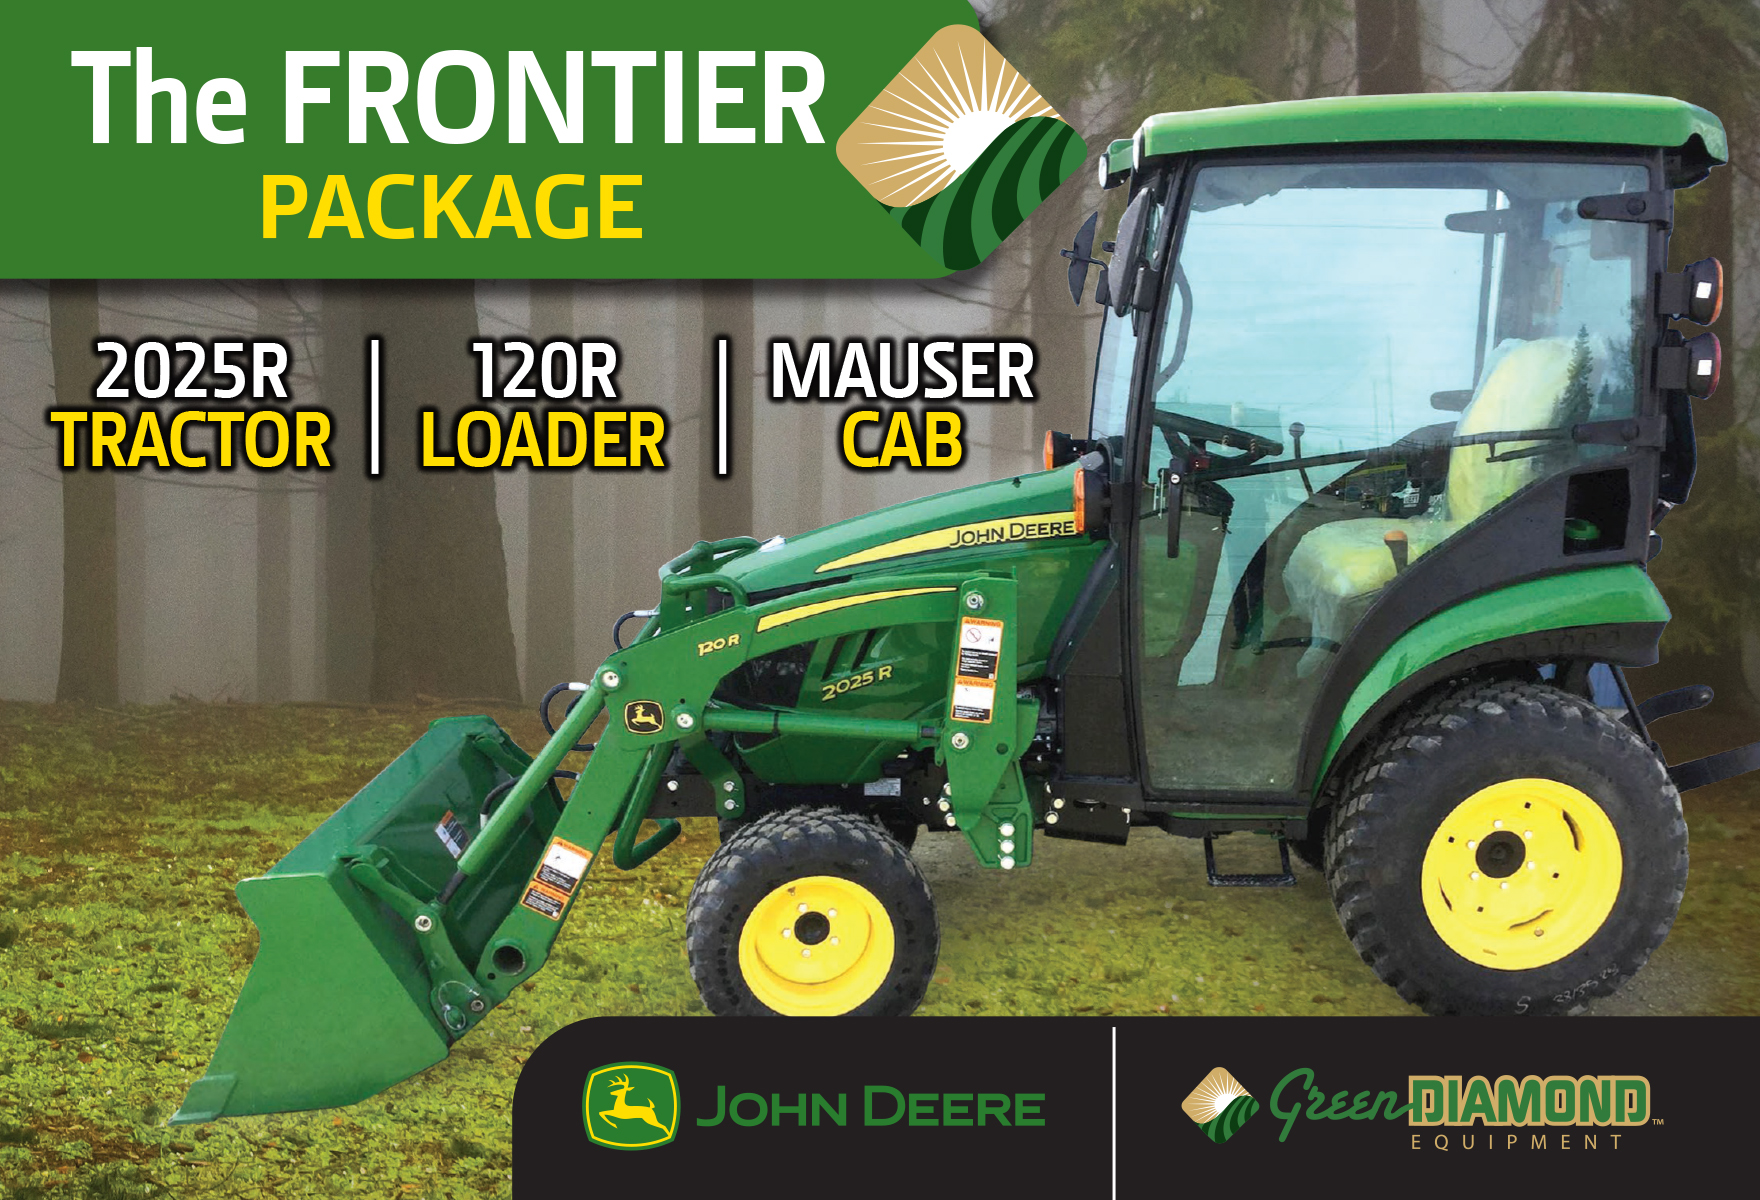 The Frontier Package